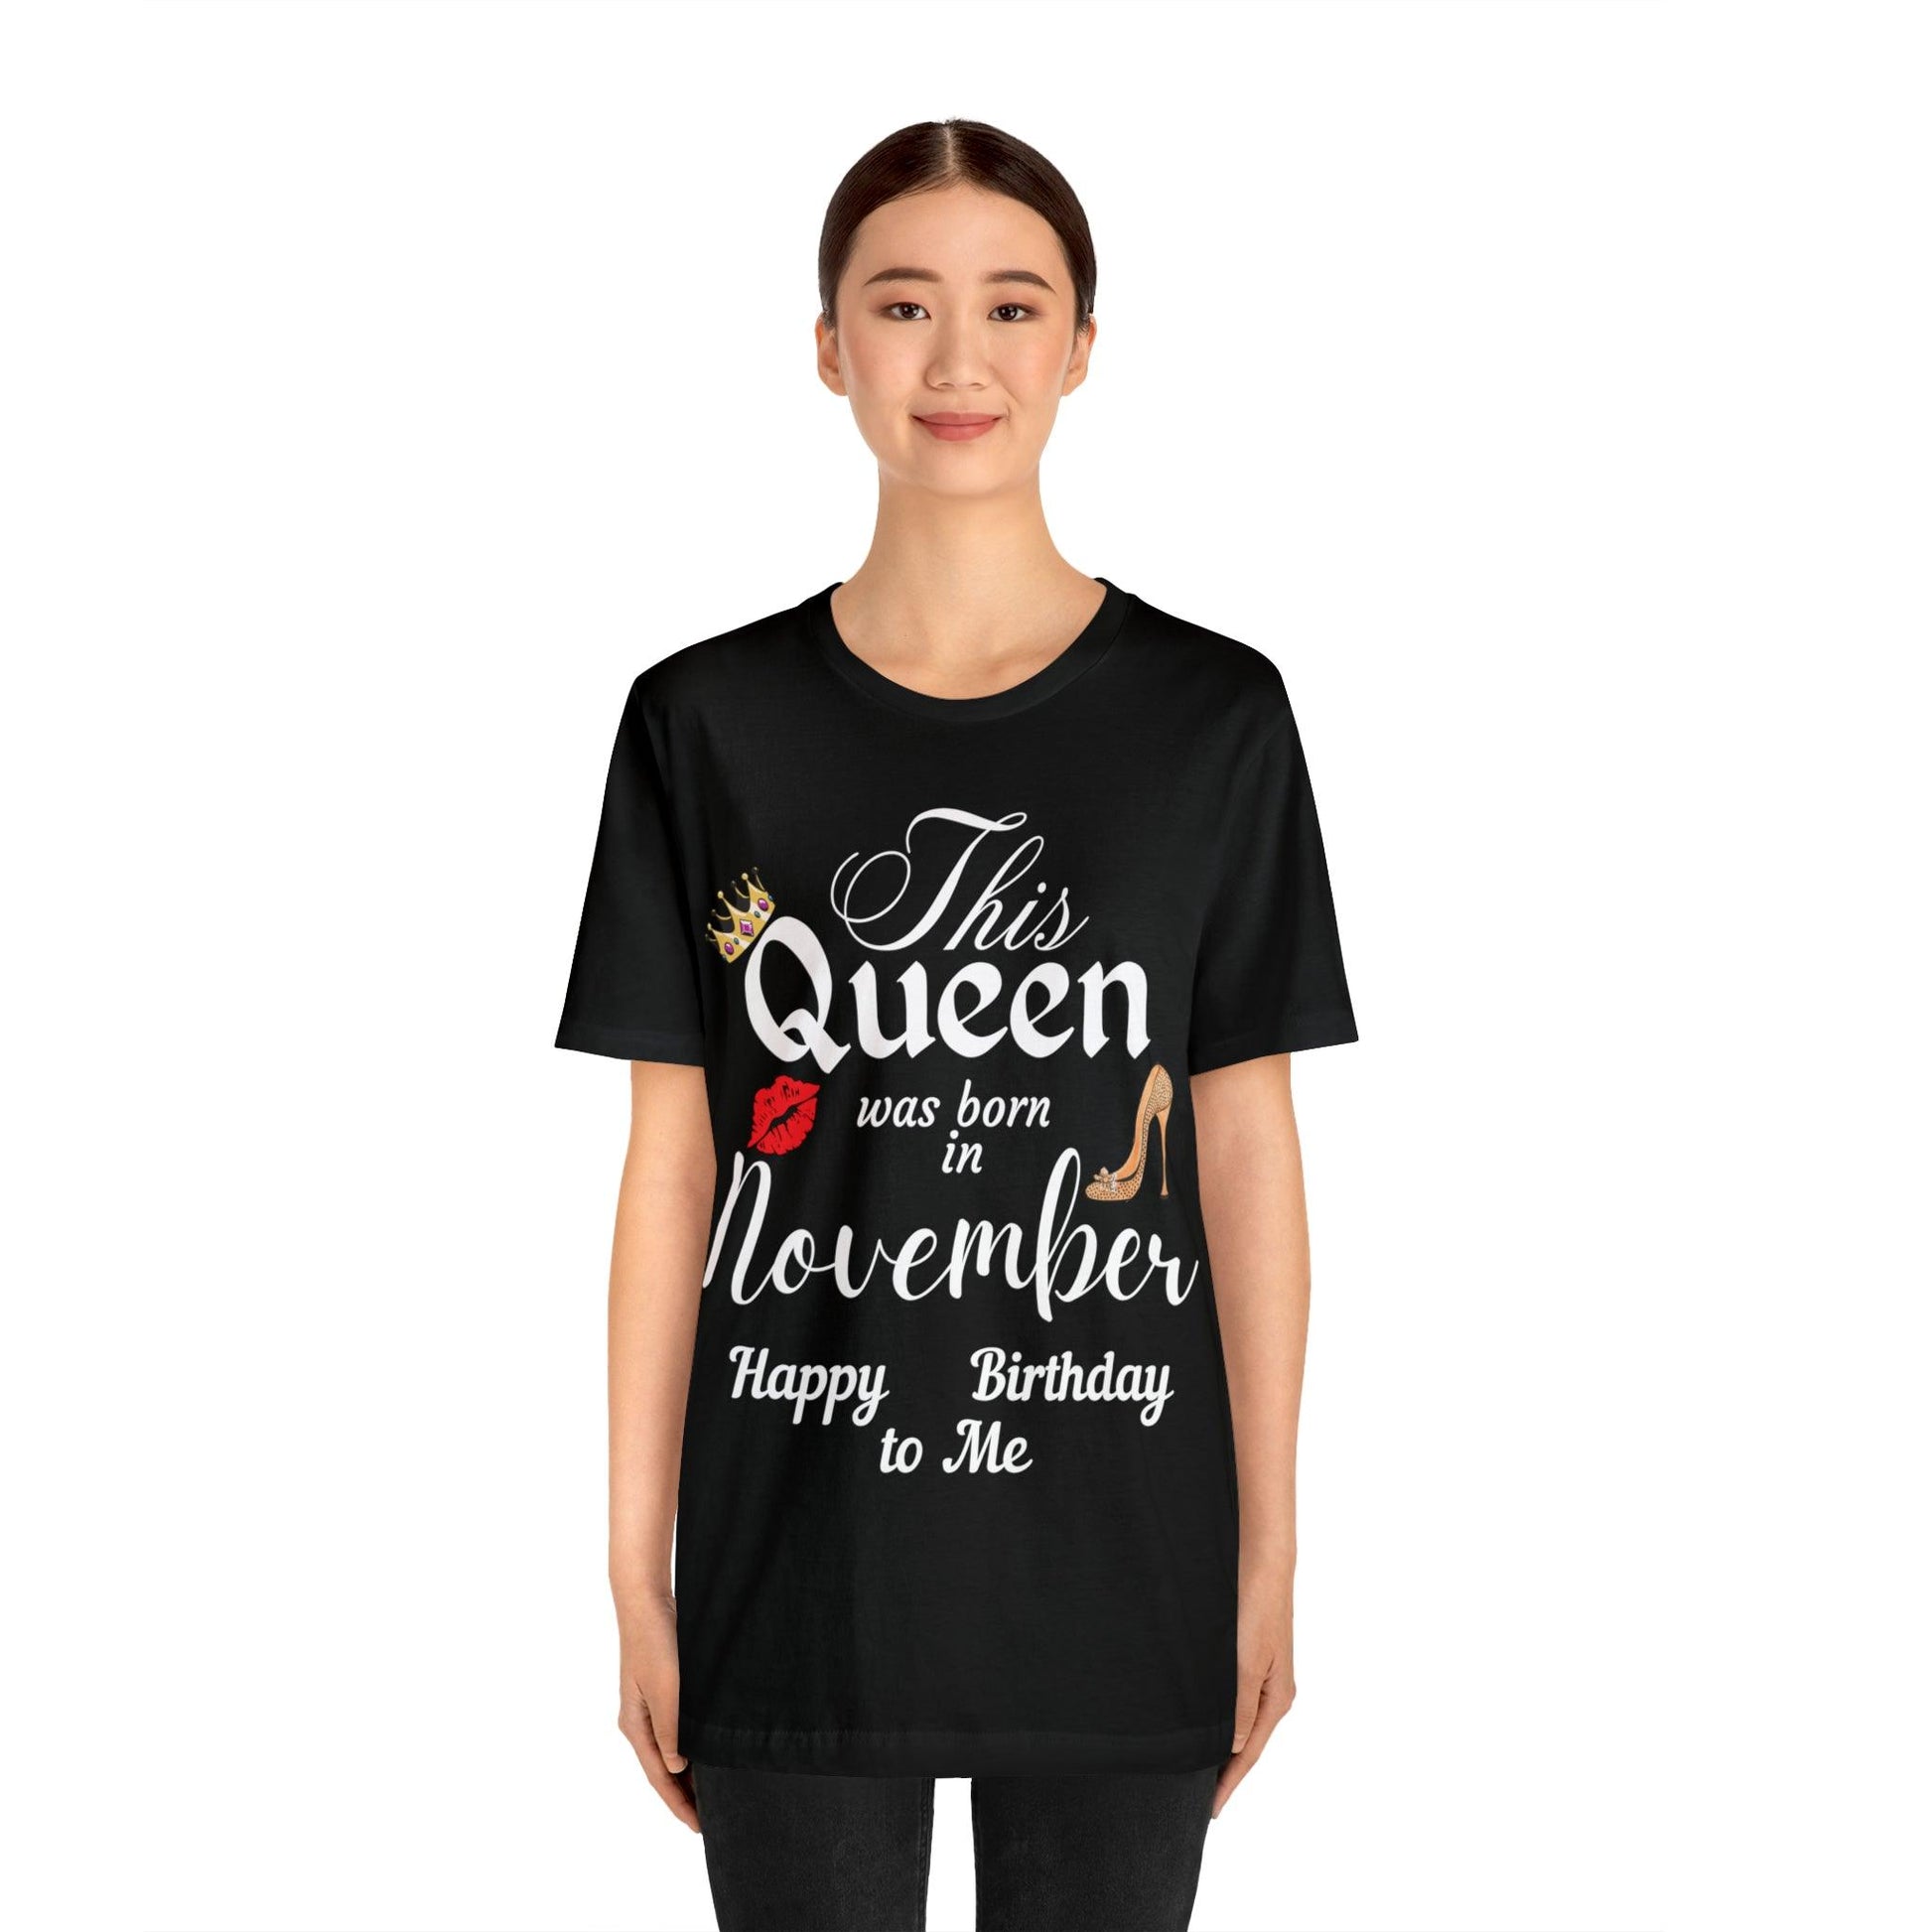 Birthday Queen Shirt, Gift for Birthday, This Queen was born in November Shirt, Funny Queen Shirt, Funny Birthday Shirt, Birthday Gift - Giftsmojo